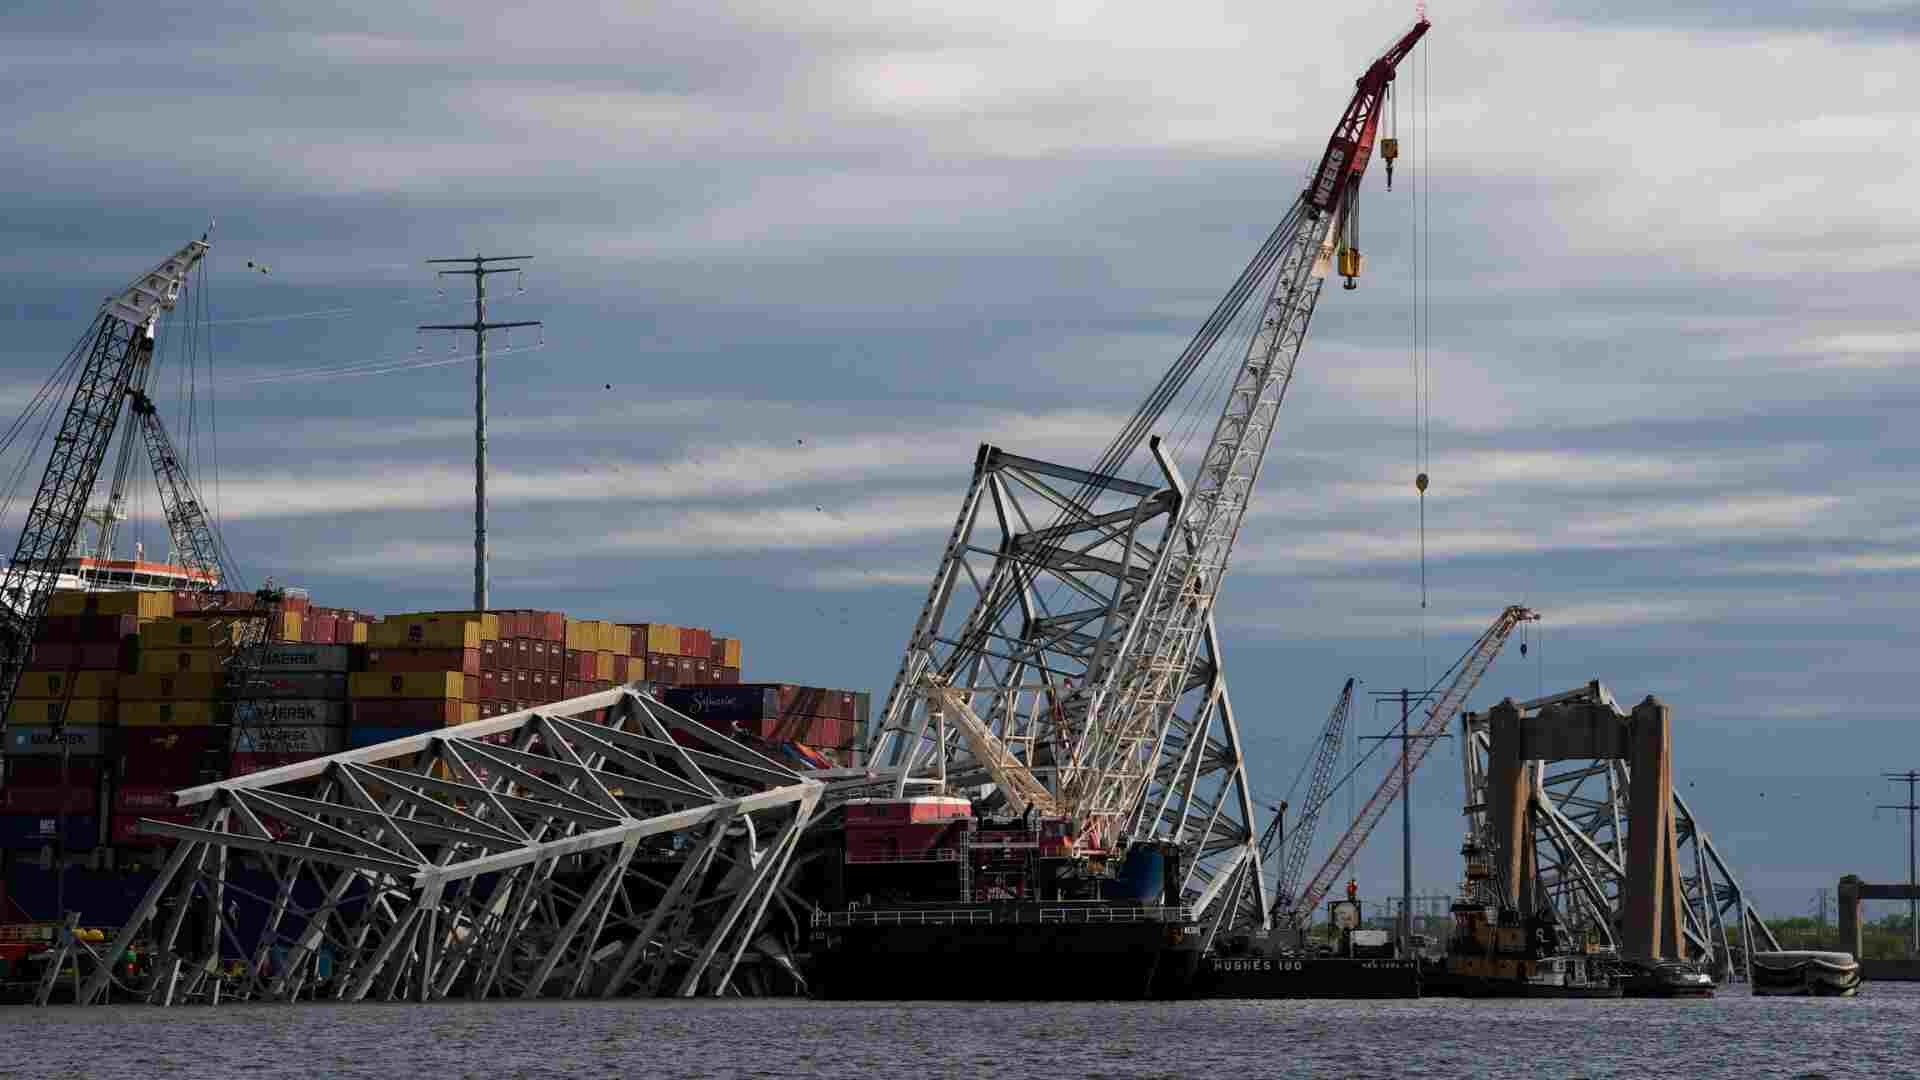 Baltimore Bridge Collapse: Body Of 6th Construction Worker Recovered